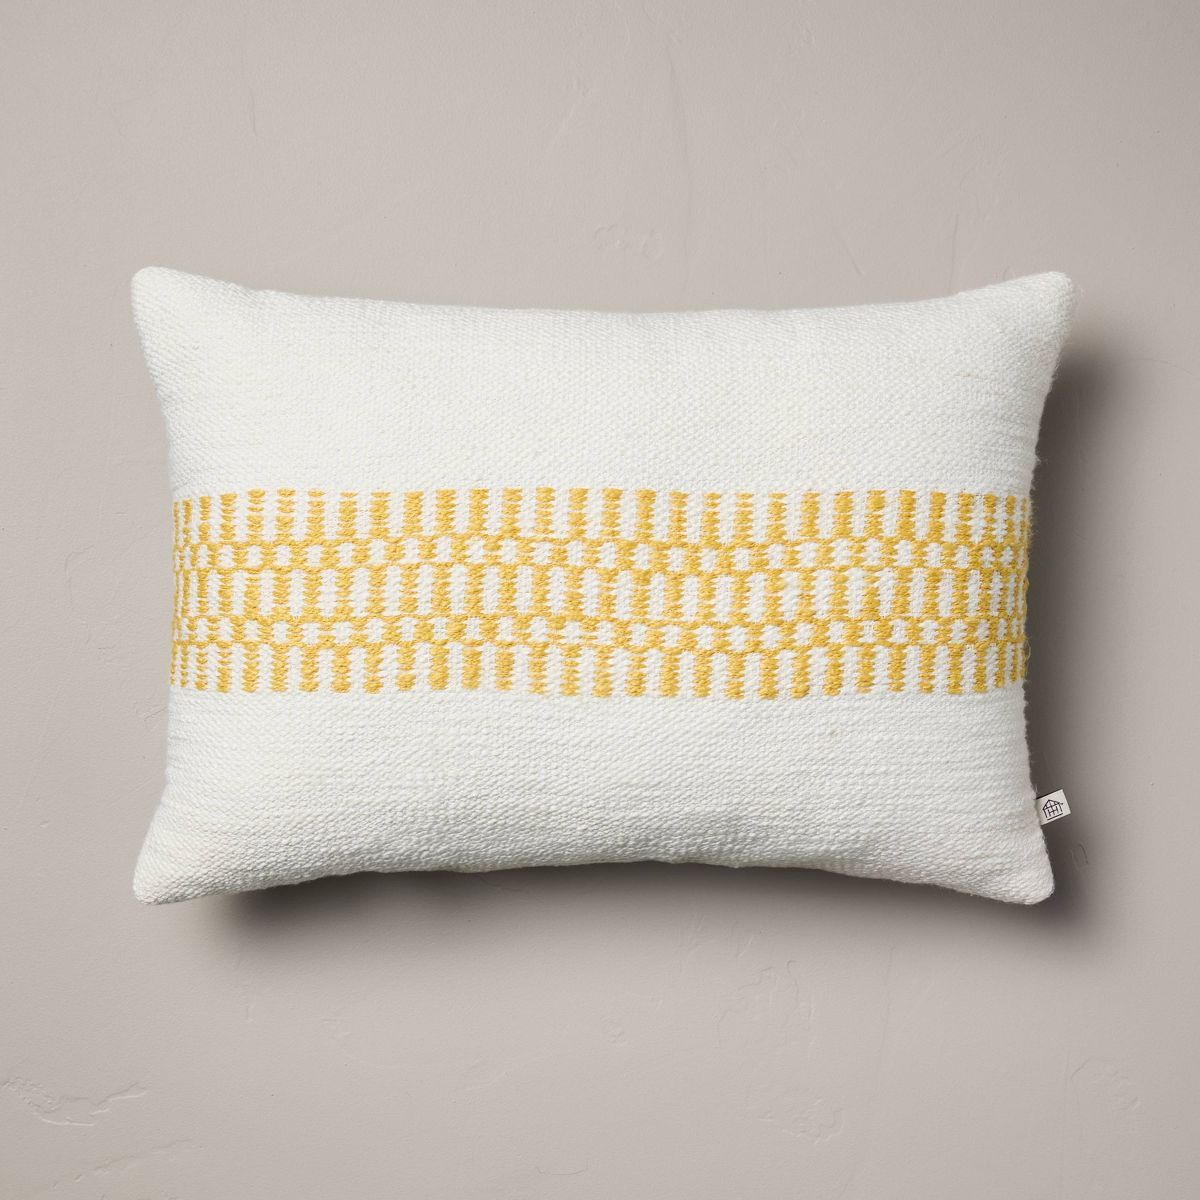 14"x20" Checkered Stripe Indoor/Outdoor Lumbar Throw Pillow - Hearth & Hand™ with Magnolia | Target